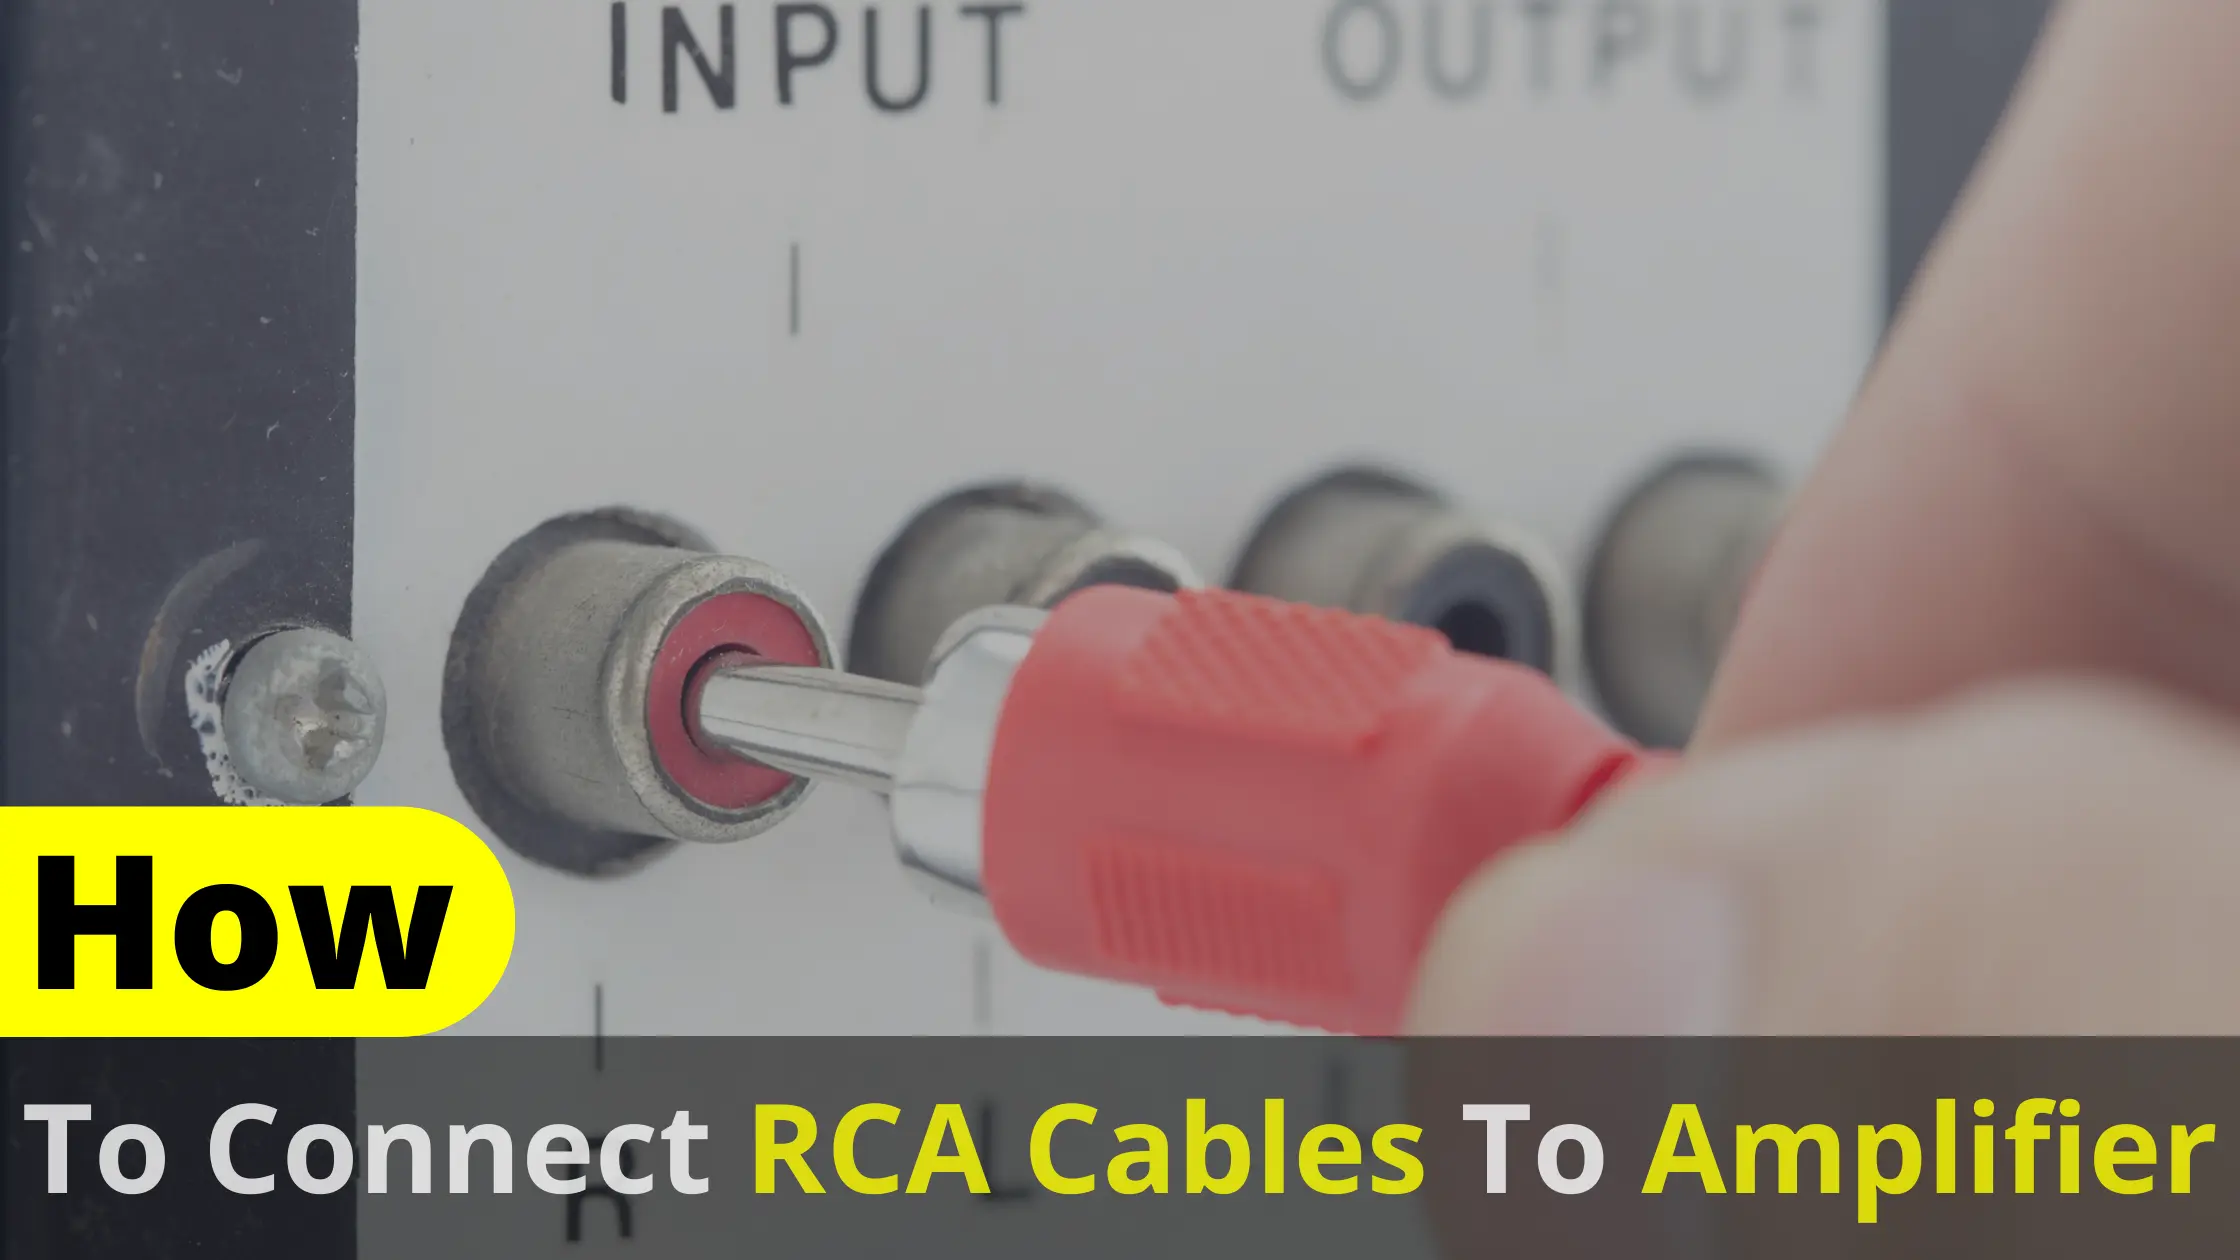 How To Connect RCA Cables To Amplifier? Latest Guide 